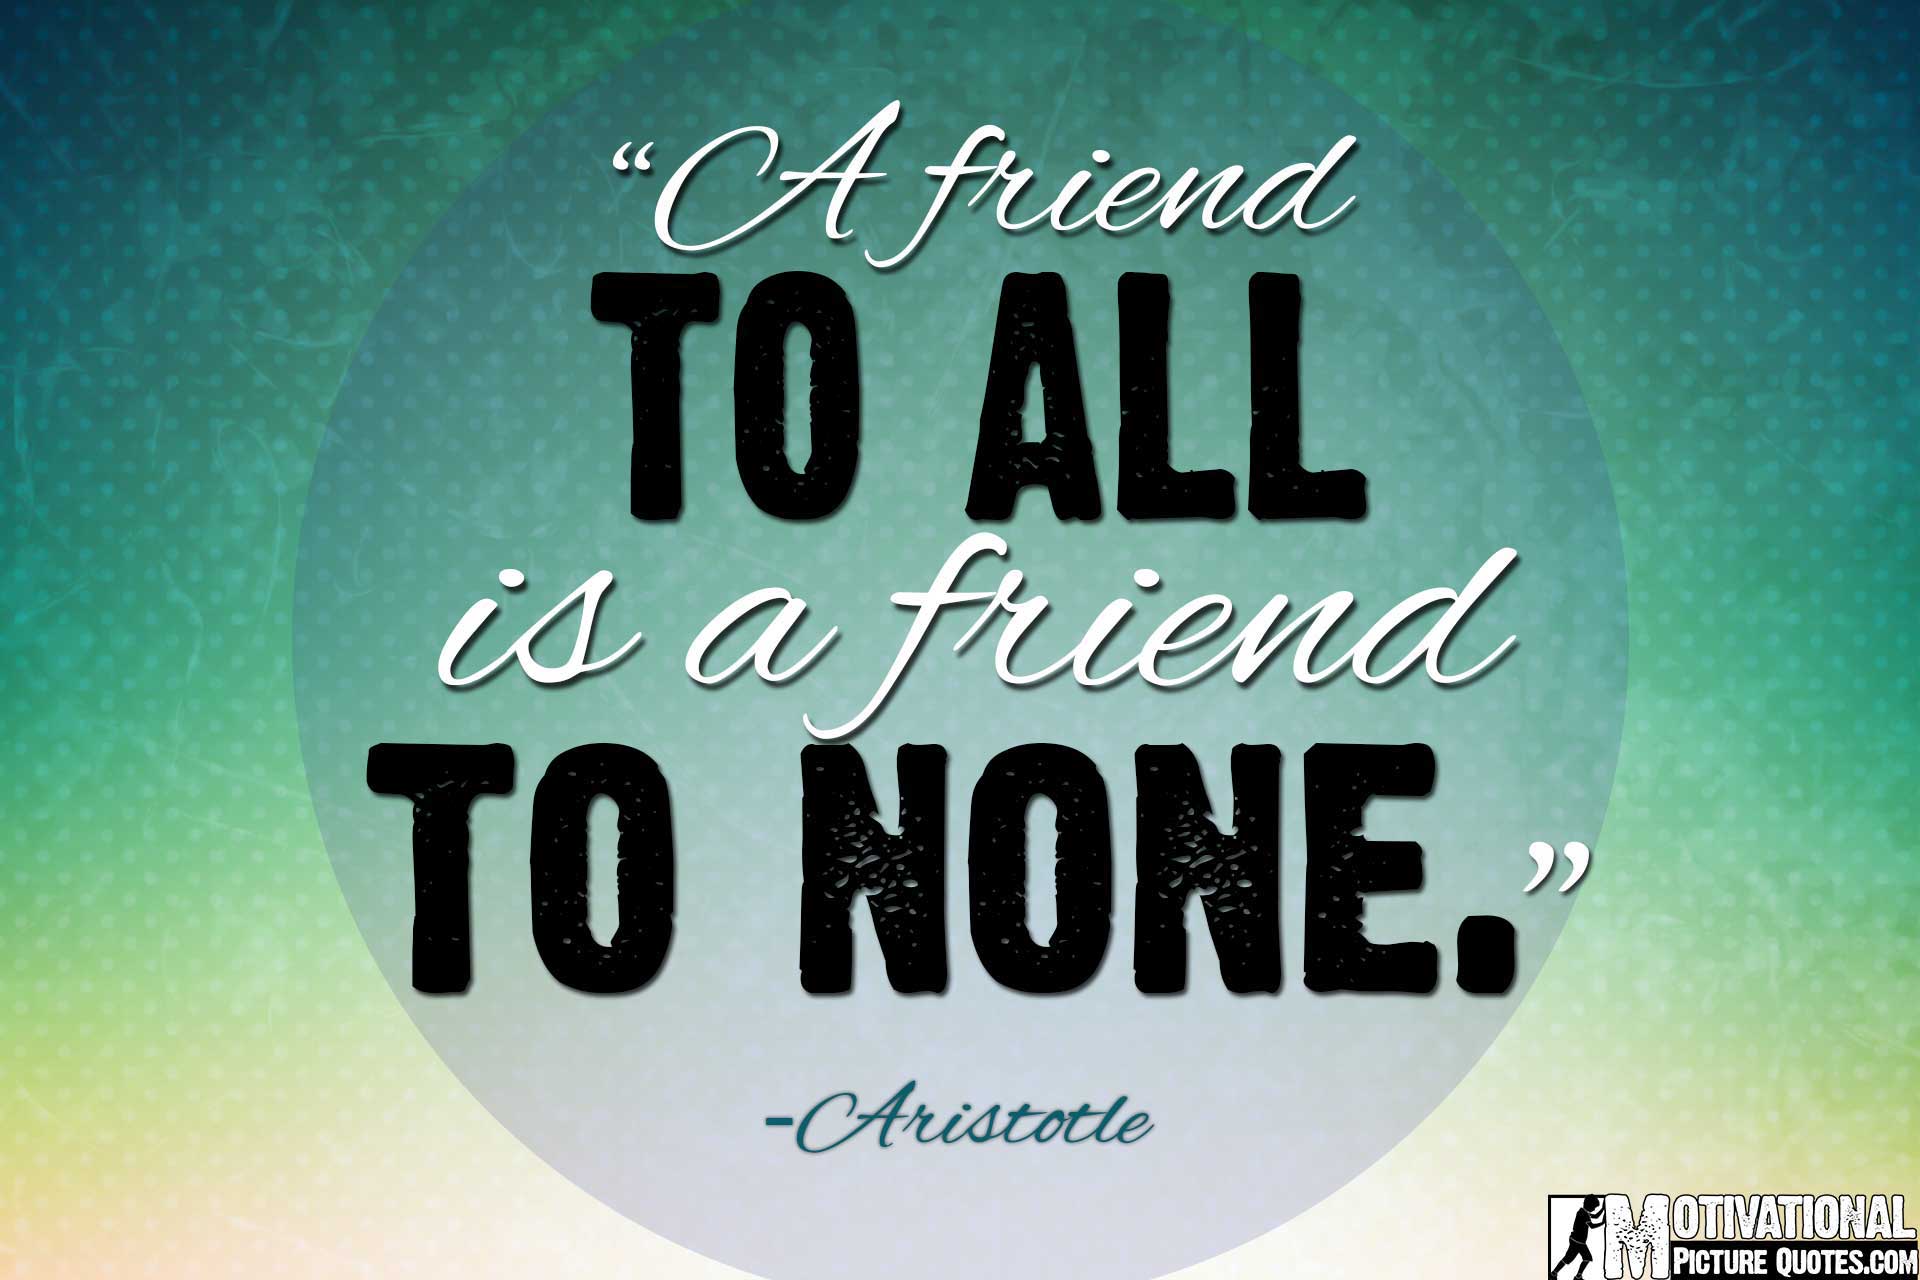 friendship quotes wallpapers hd